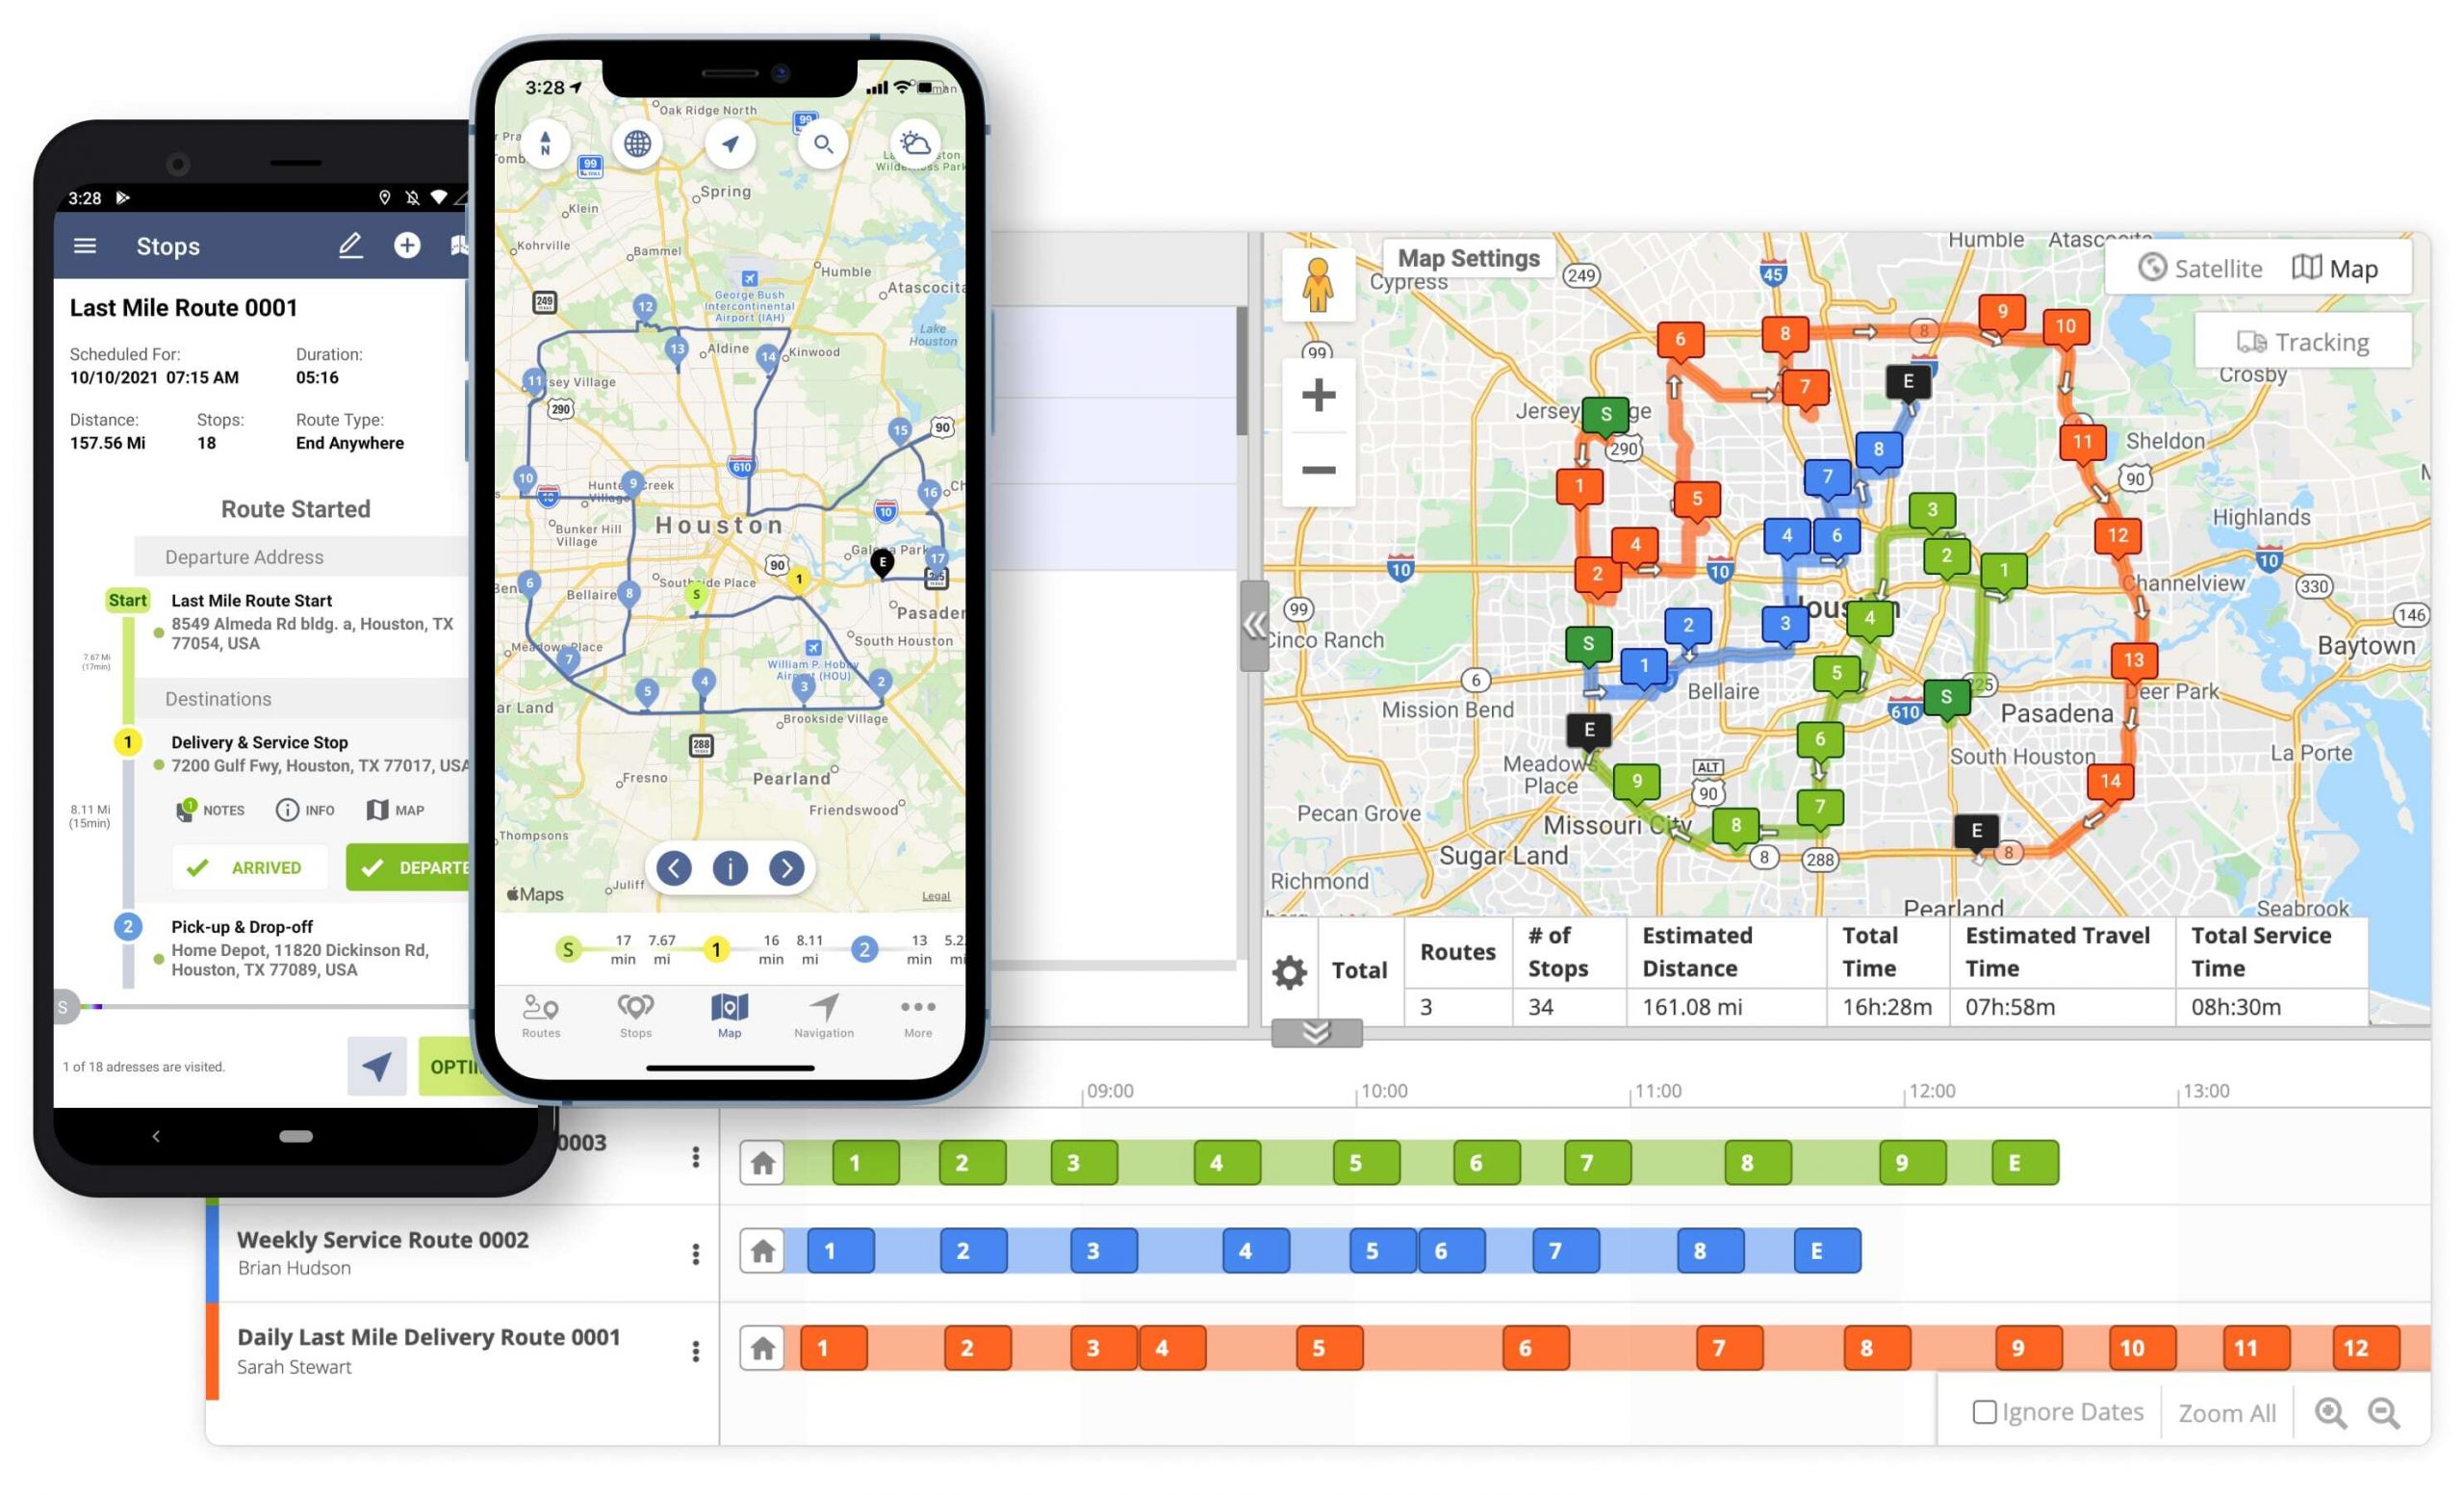 Re-plan routes dynamically using Route4Me's route optimization software and route planner apps.